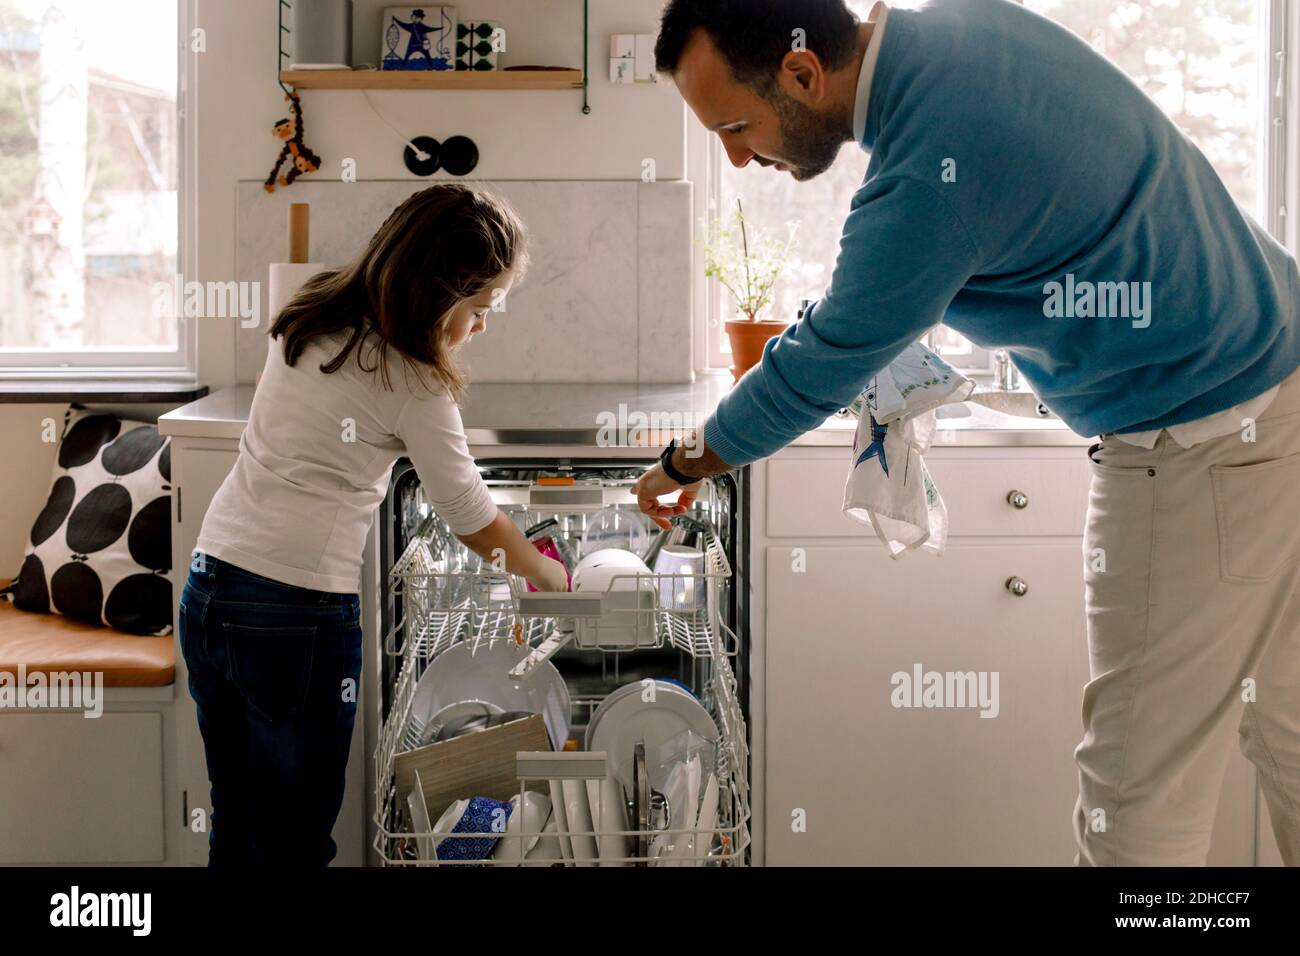 Father and daughter arranging utensils in dishwasher at kitchen Stock Photo